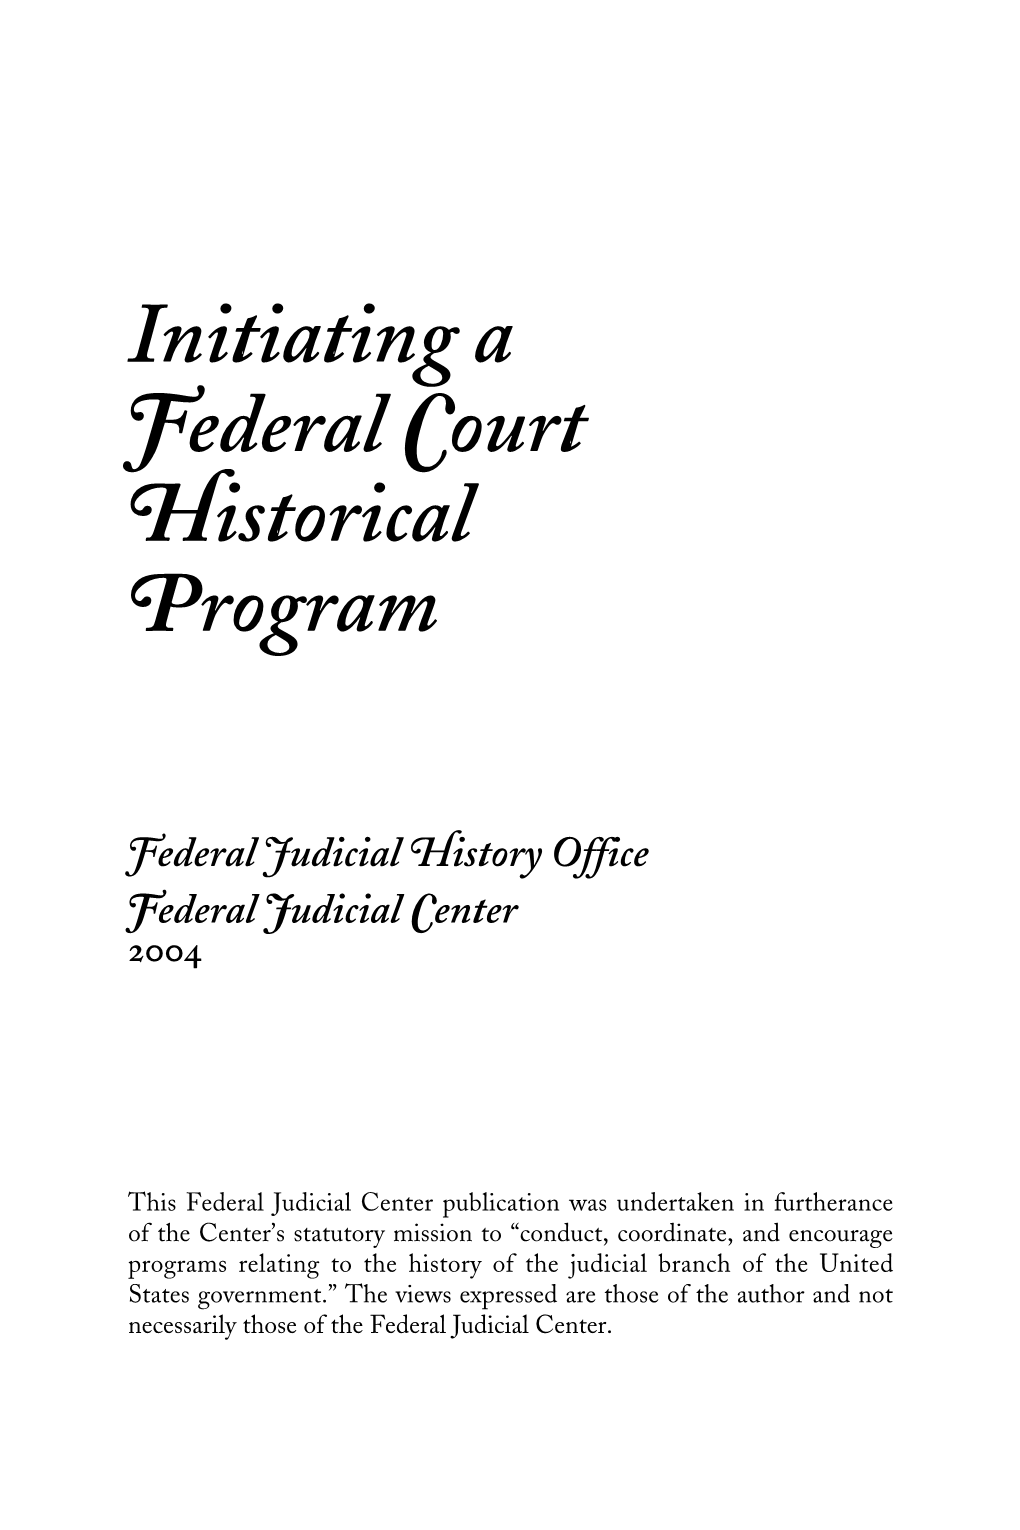 Initiating a Federal Court Historical Program